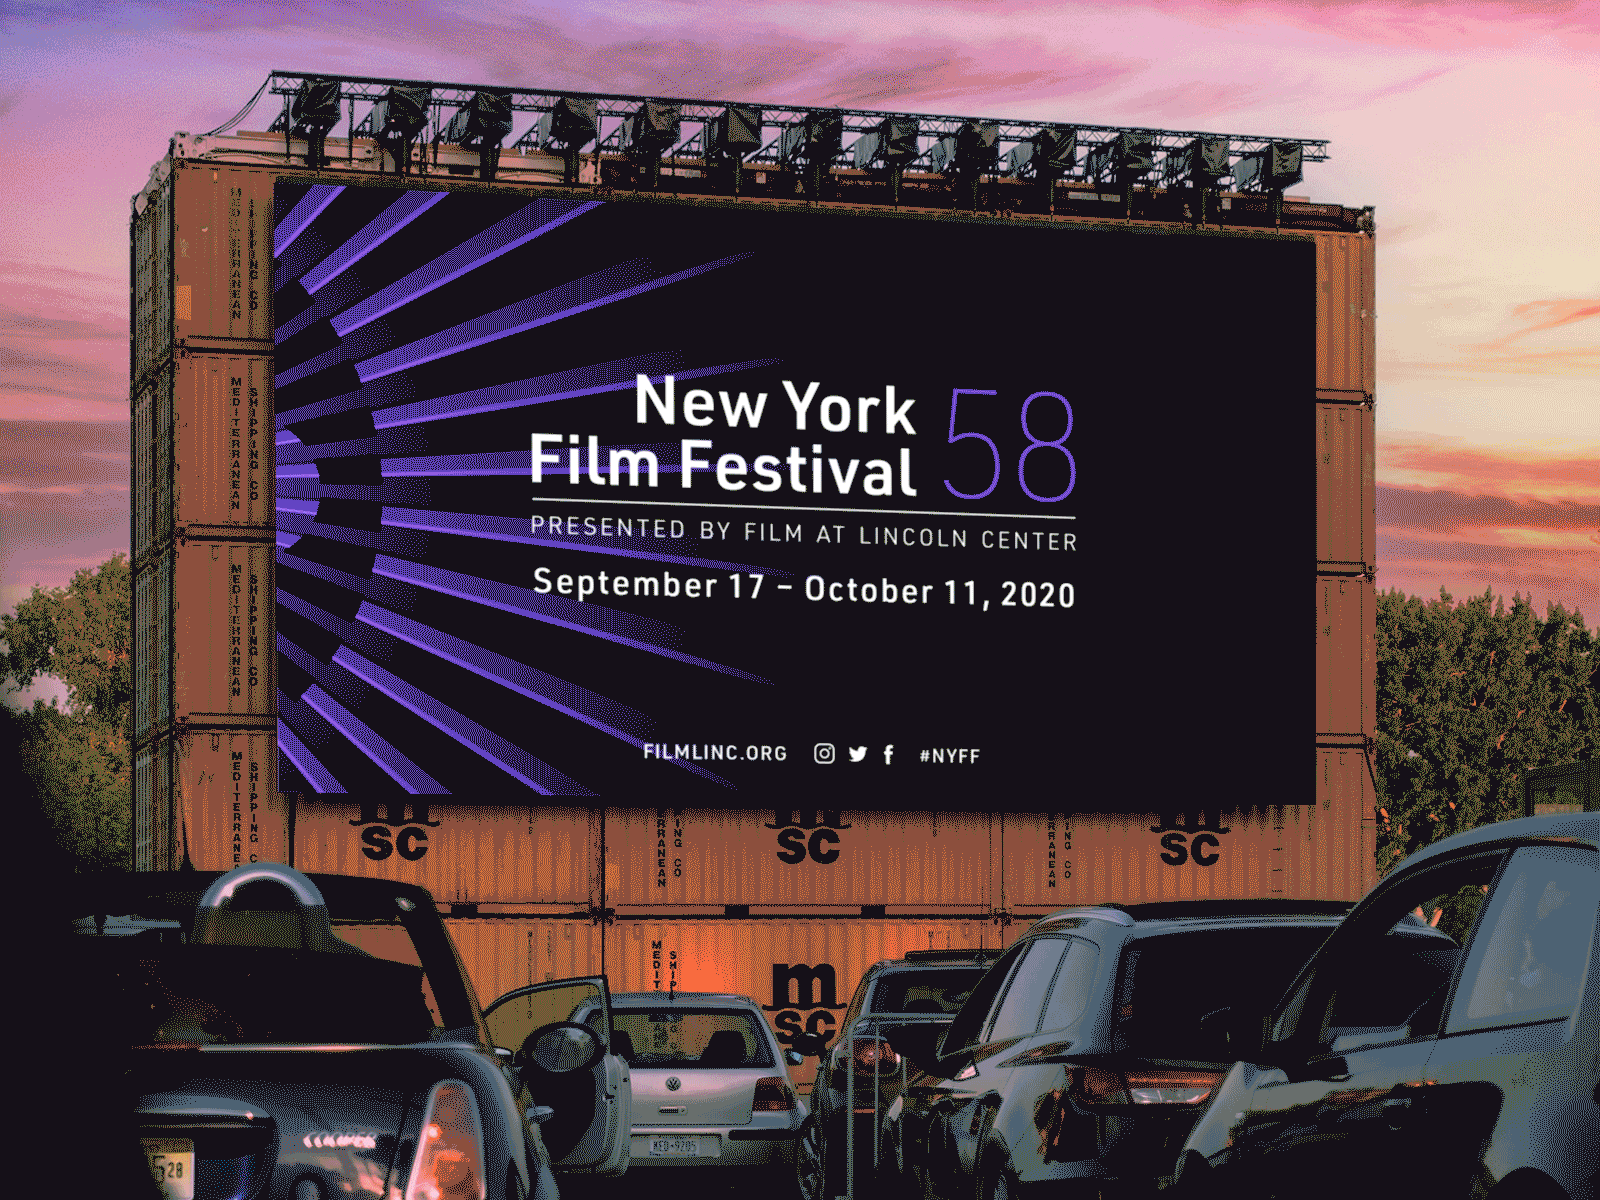 New York Film Festival 58 advertising design graphic design large format merchandise posters web banners